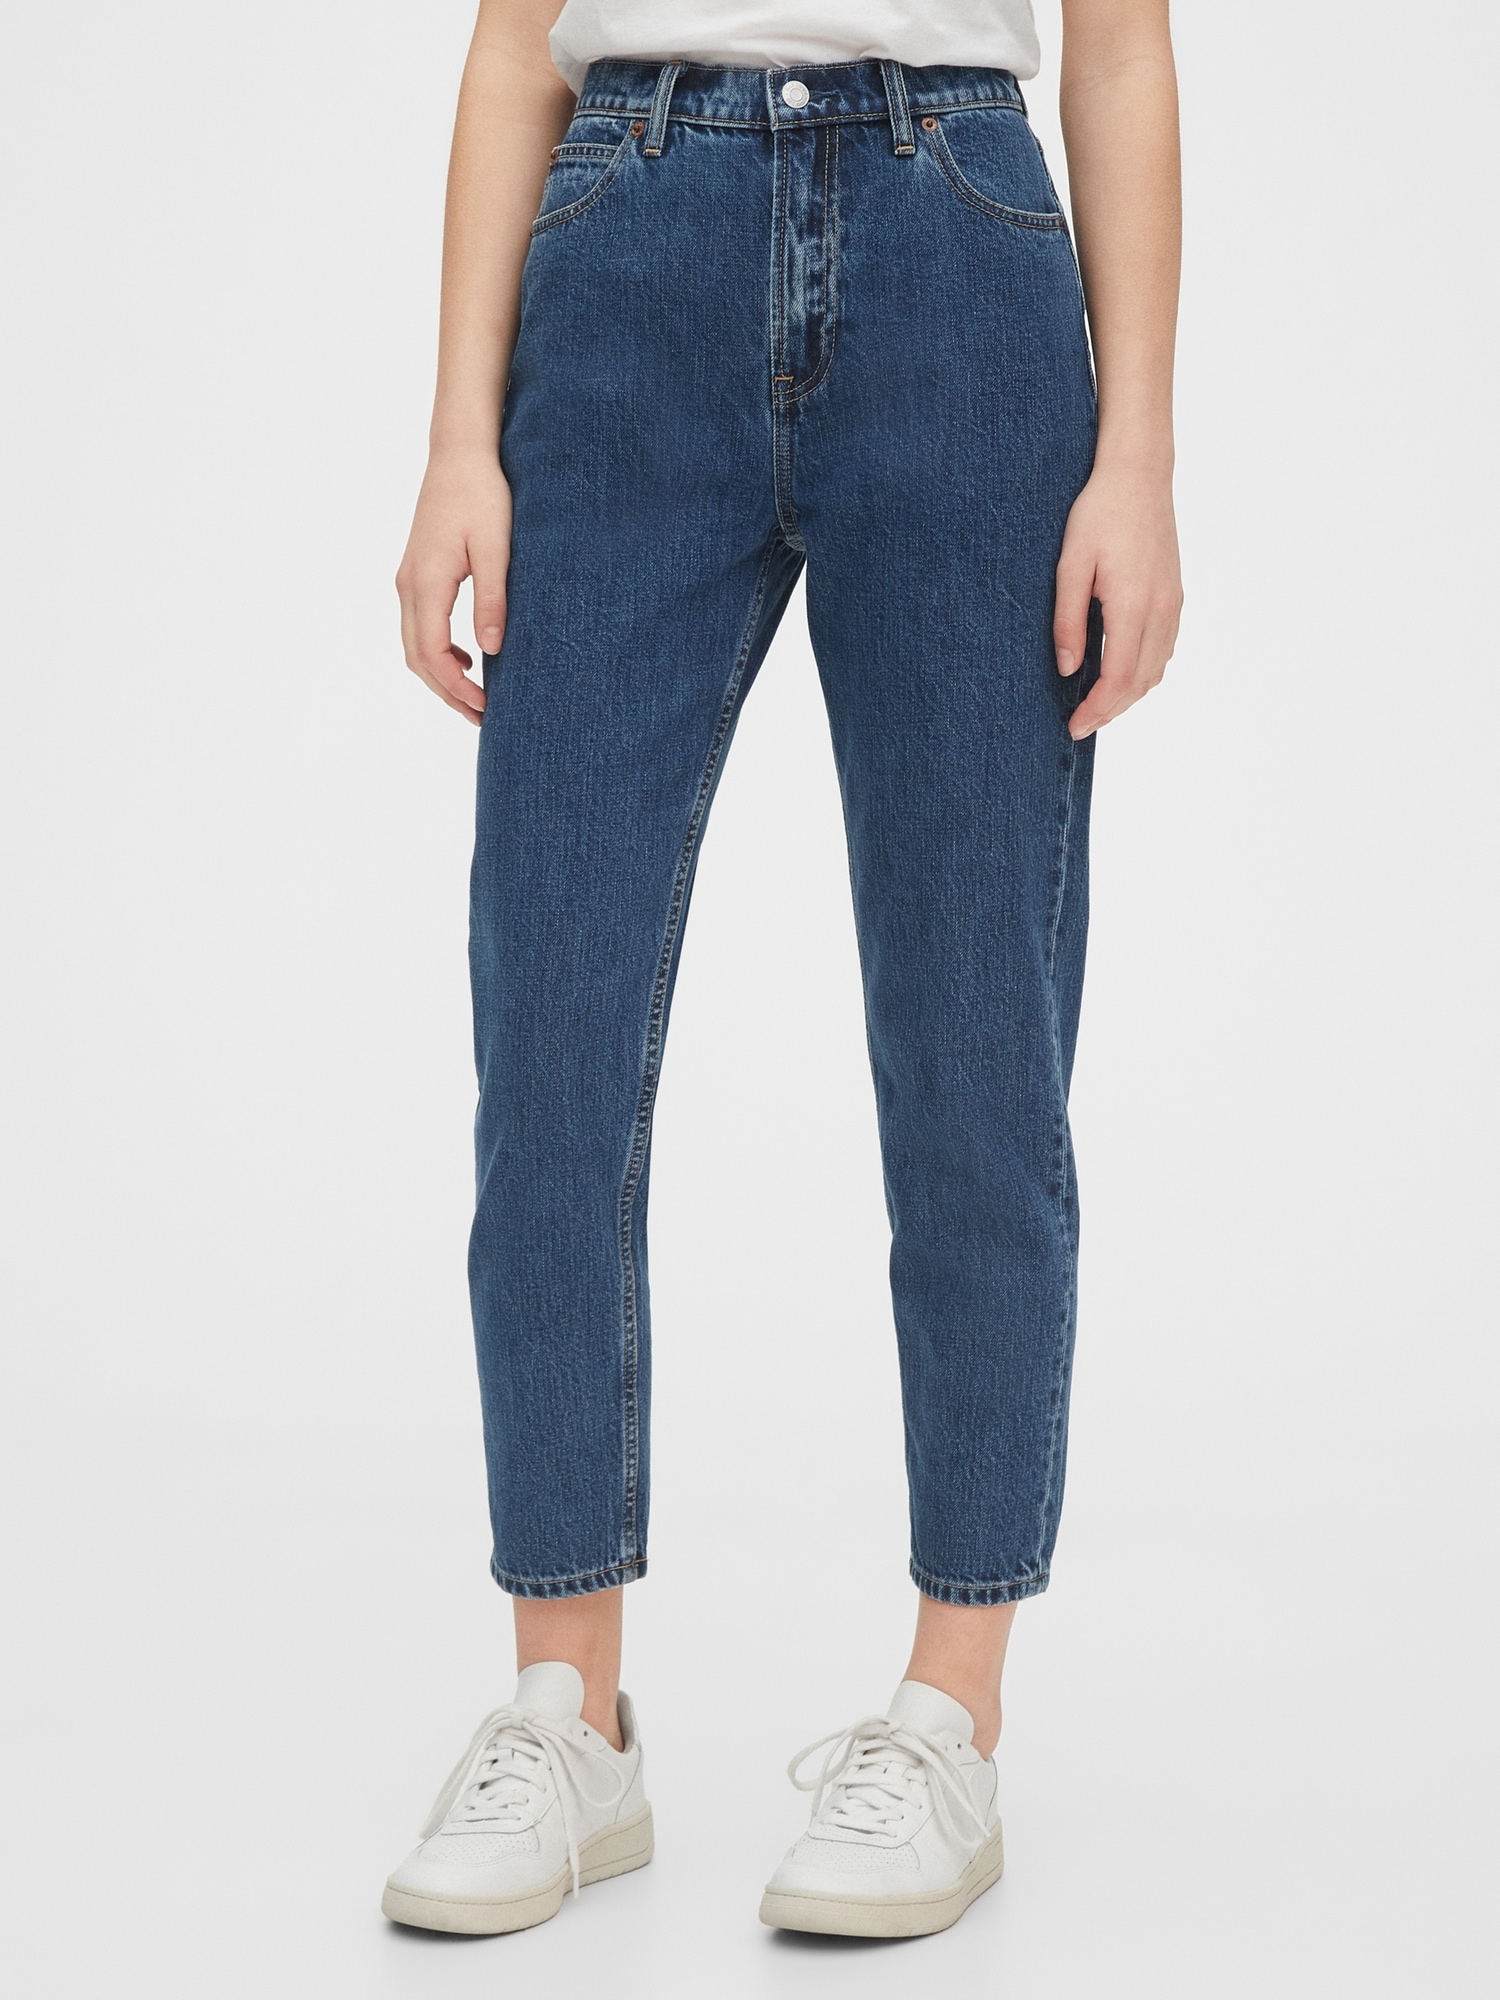 m and s stretch jeans